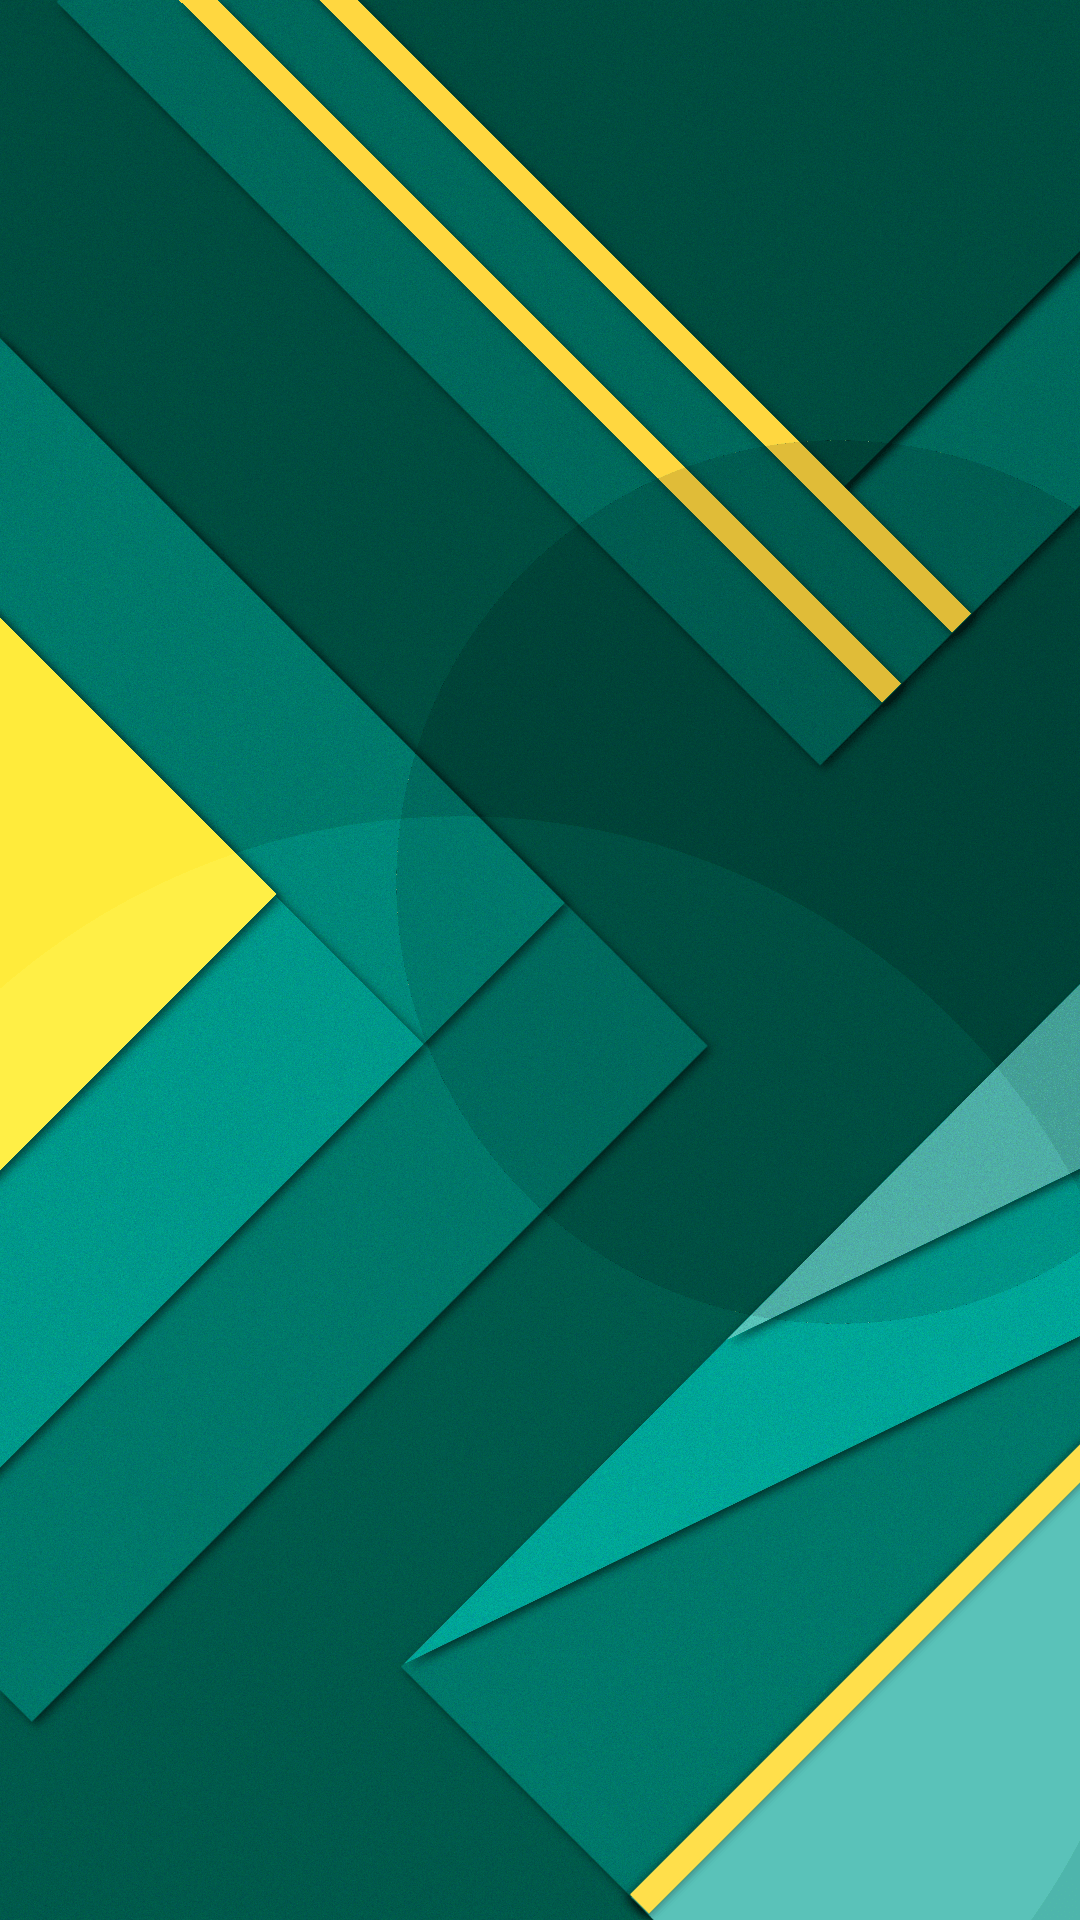 Creating a material design wallpaper for your smartphone